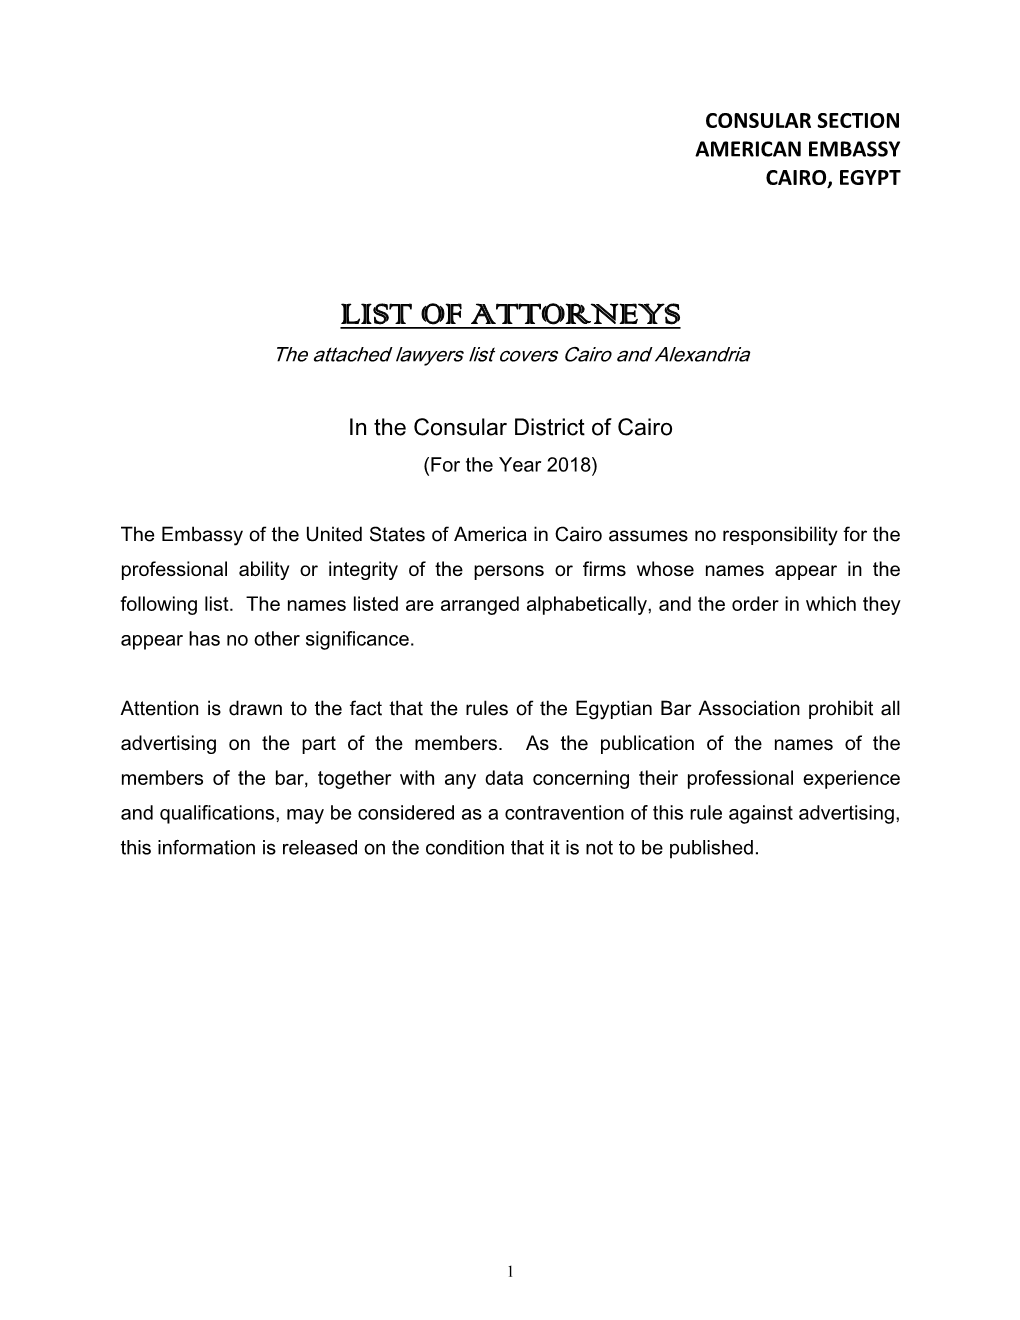 LIST of ATTORNEYS the Attached Lawyers List Covers Cairo and Alexandria